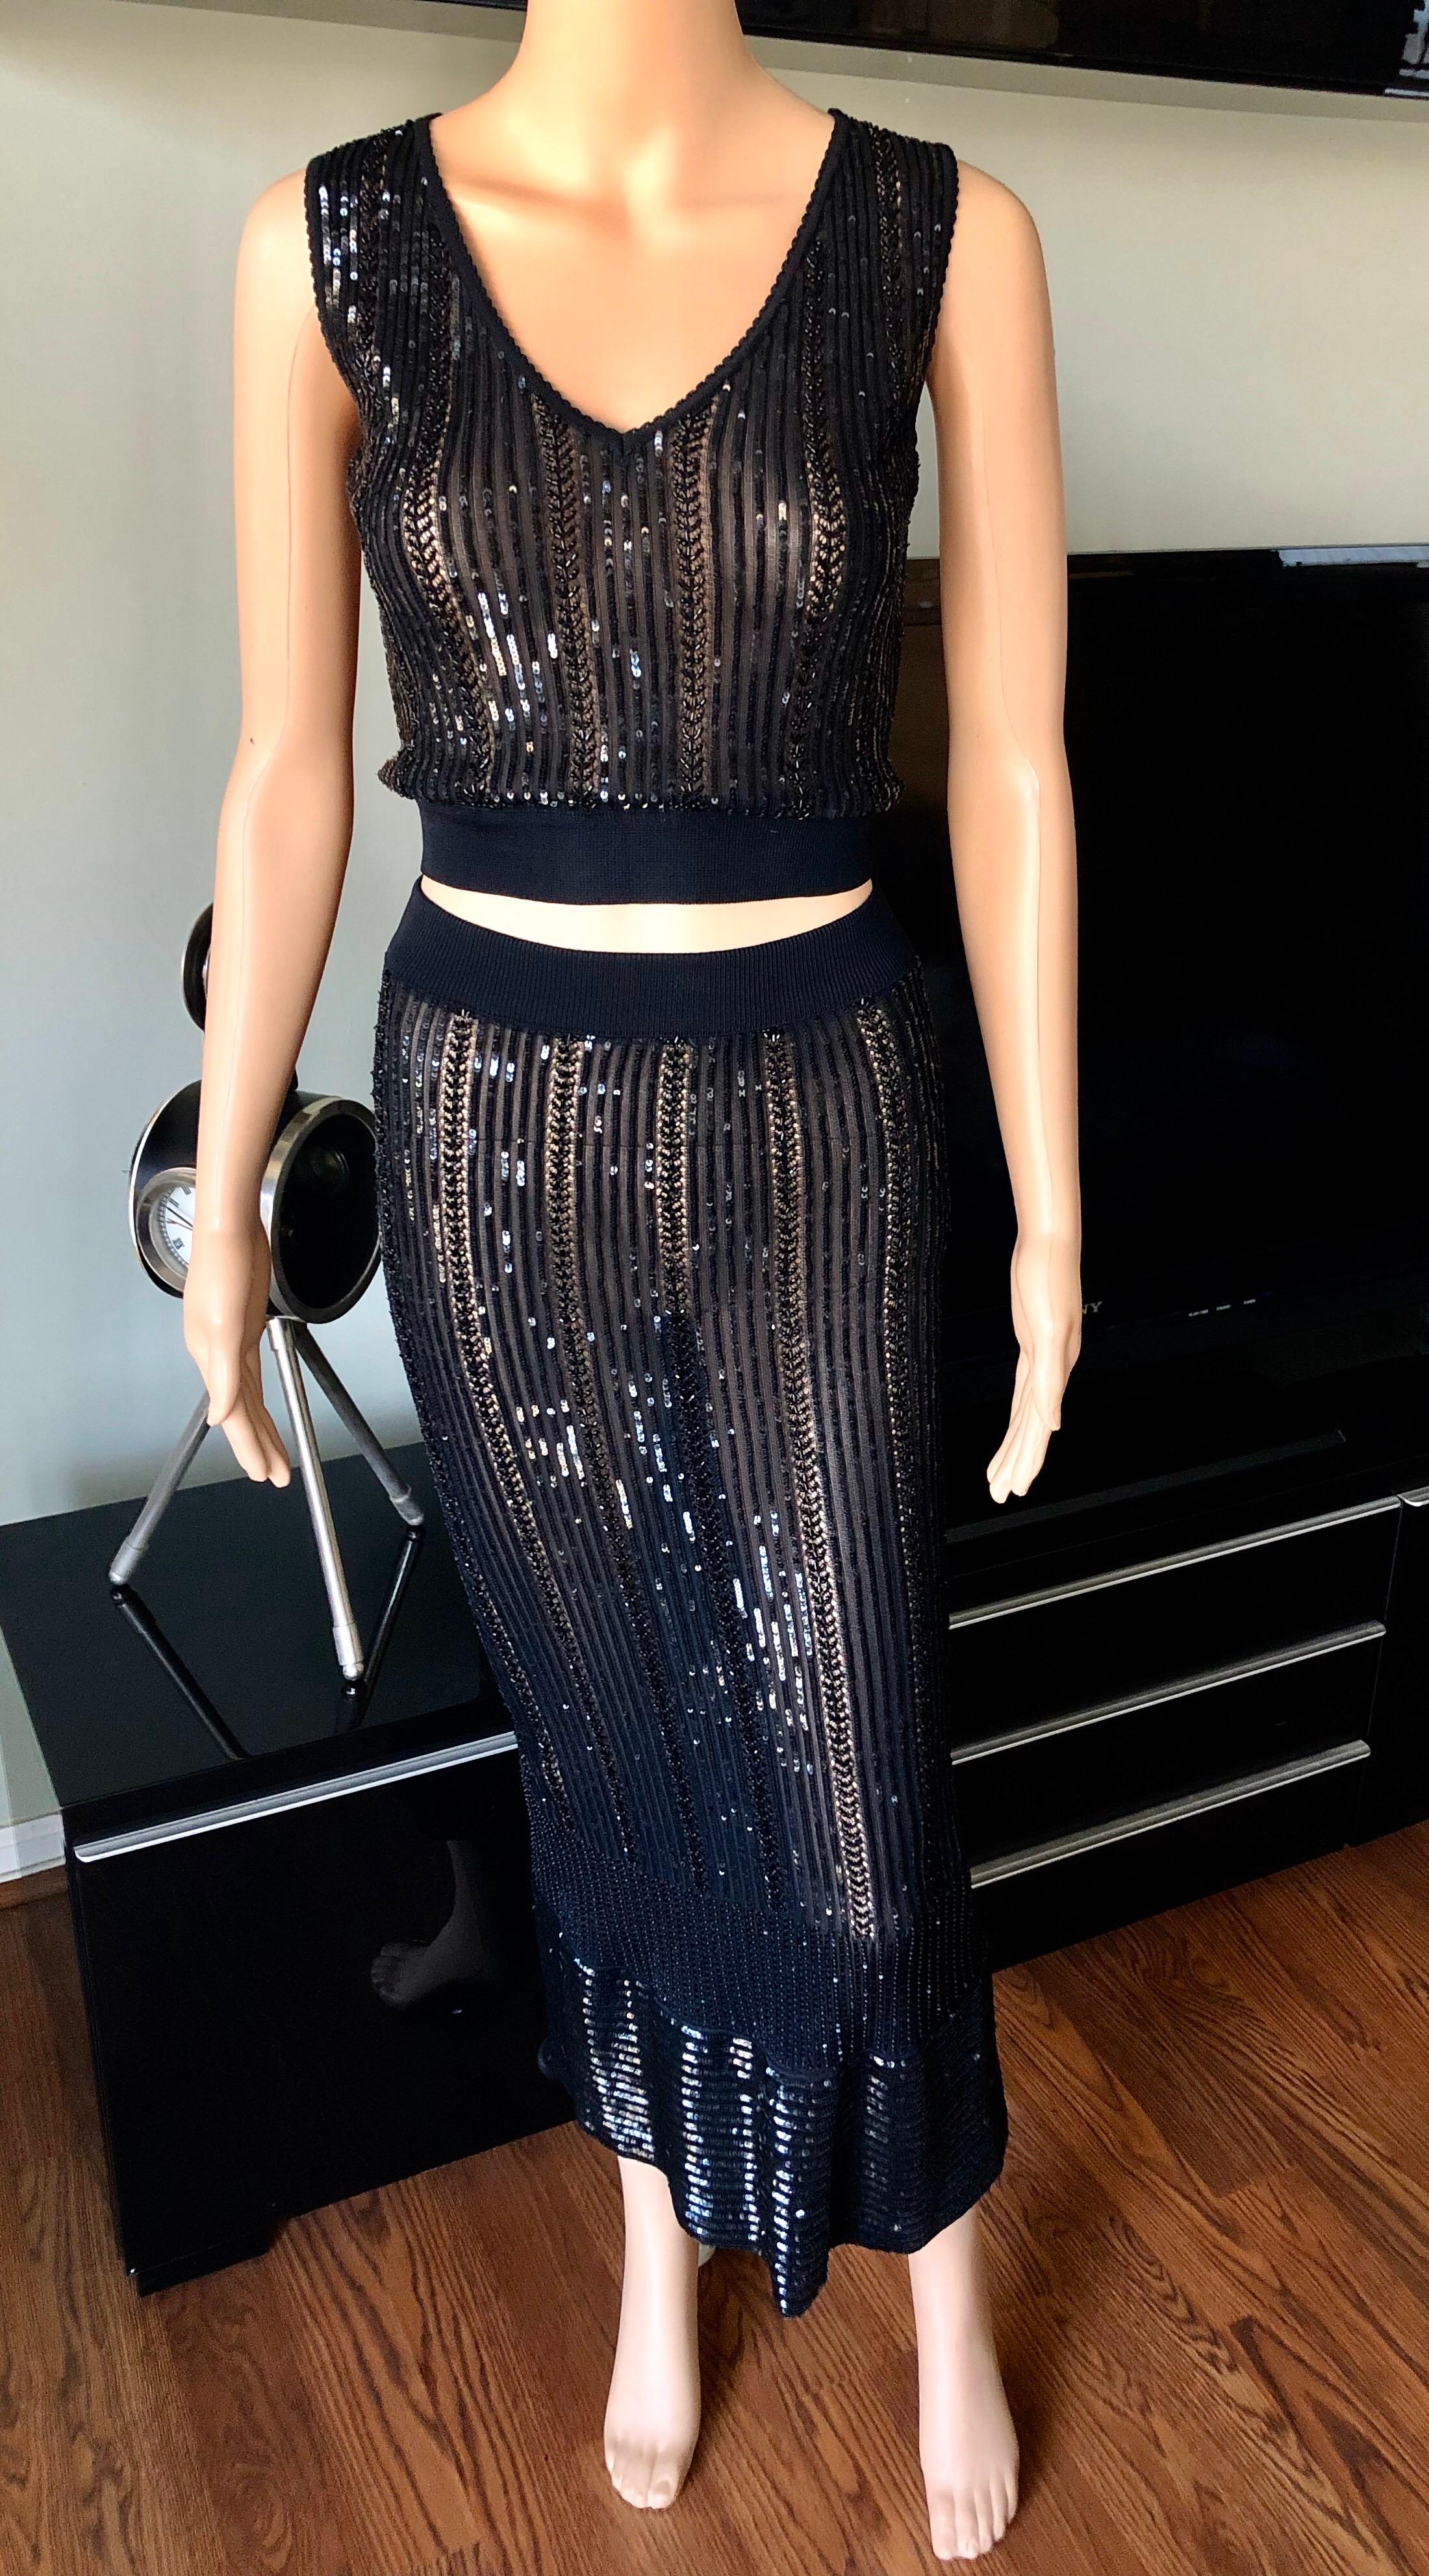 Azzedine Alaia Vintage S/S 1996 Sequin Embellished Black 3 Piece Skirt Set Size XS

Alaïa Vintage black three-piece skirt set with sequin embellishments throughout. Cardigan features V-neck, long sleeves and button-up closures at front. Sleeveless